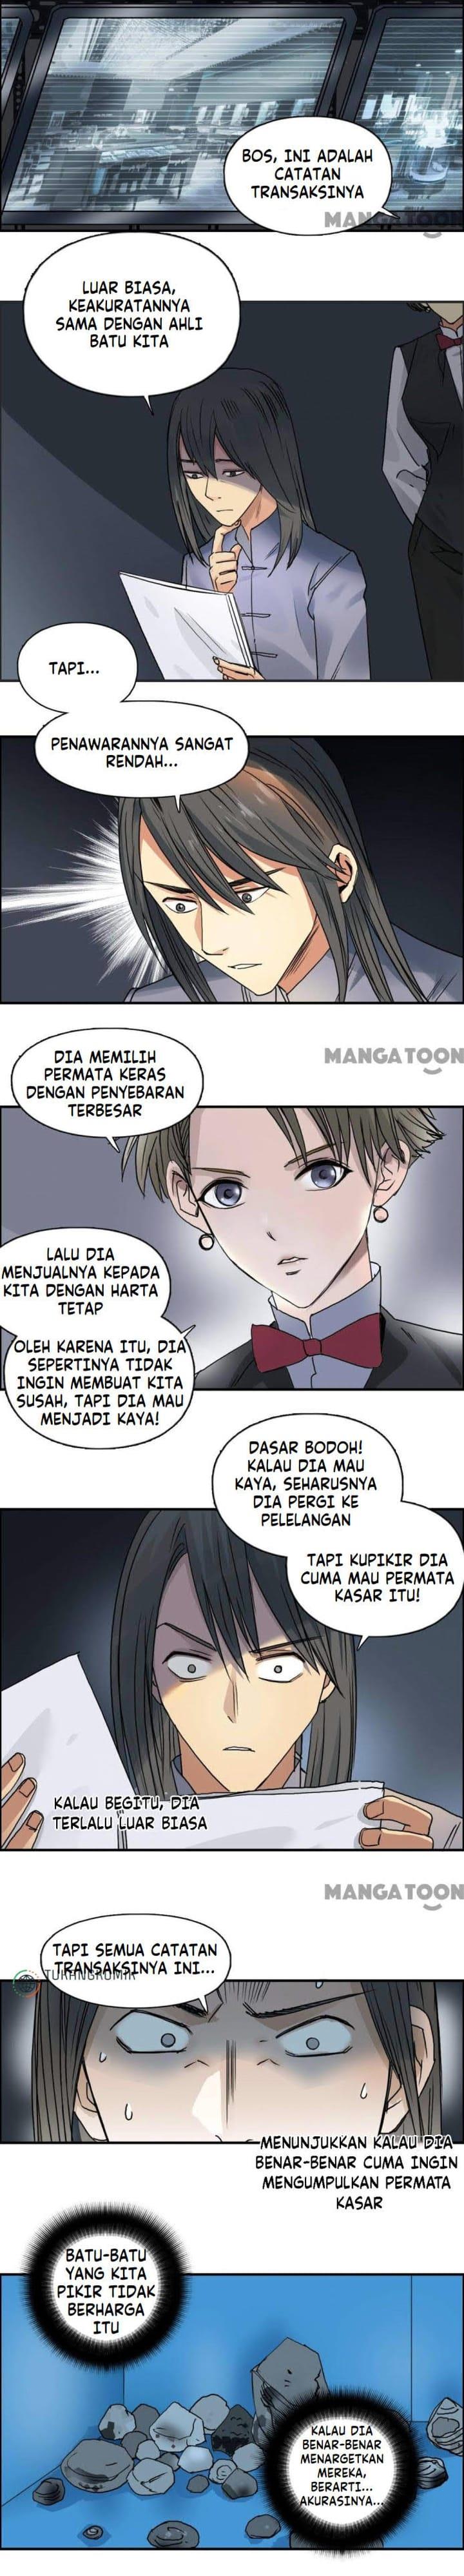 Super Cube Chapter 78